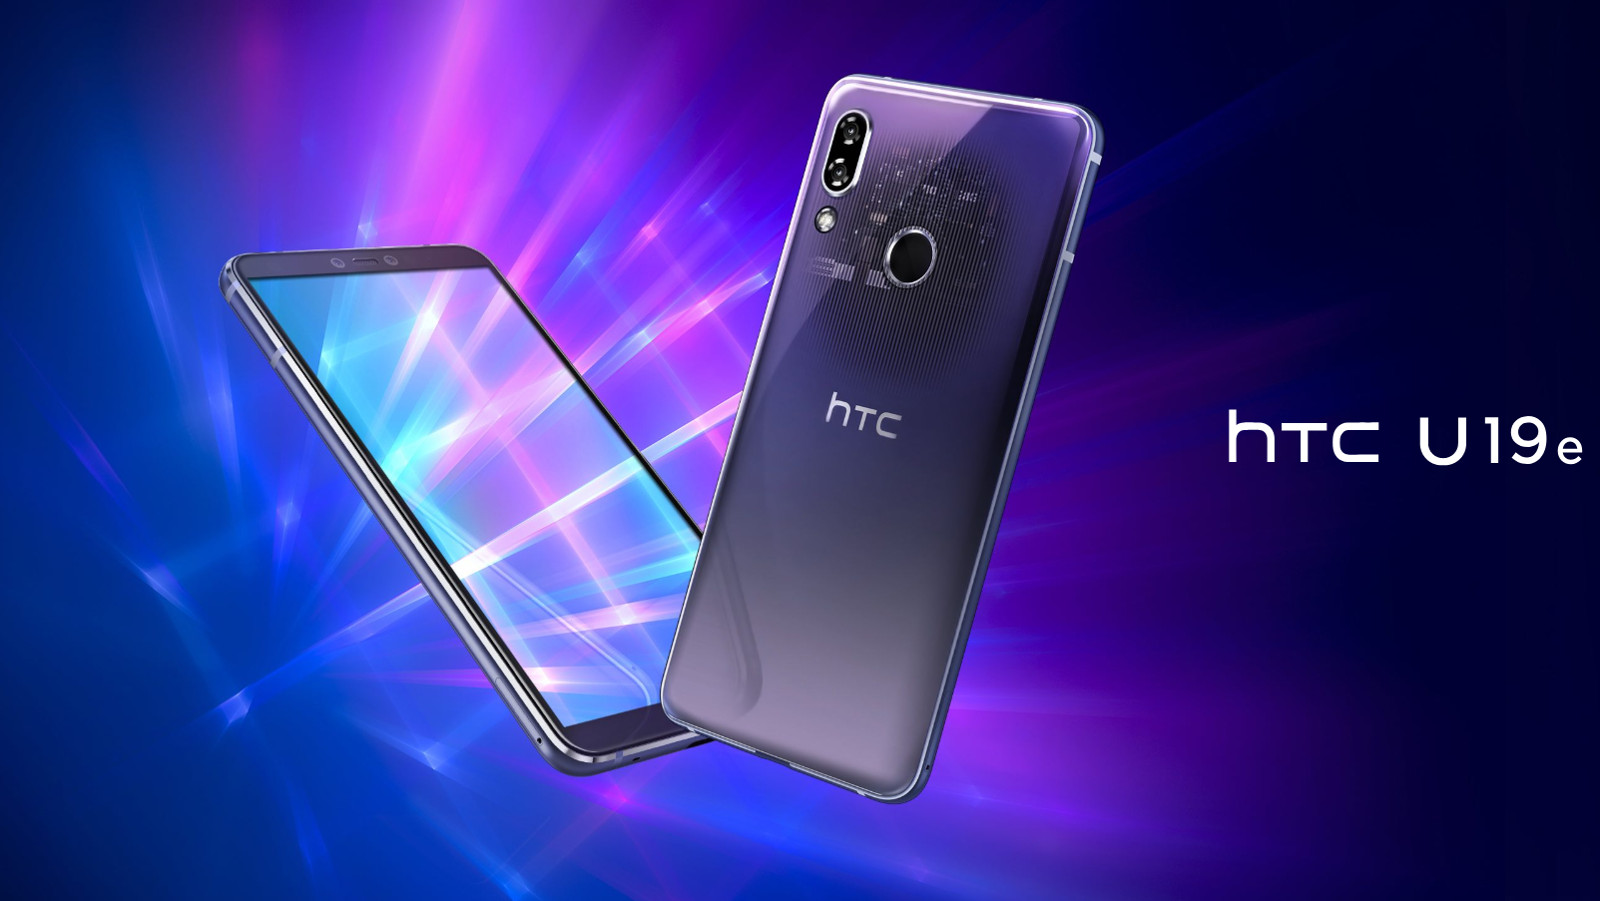 How to boot into safe mode on HTC U19e